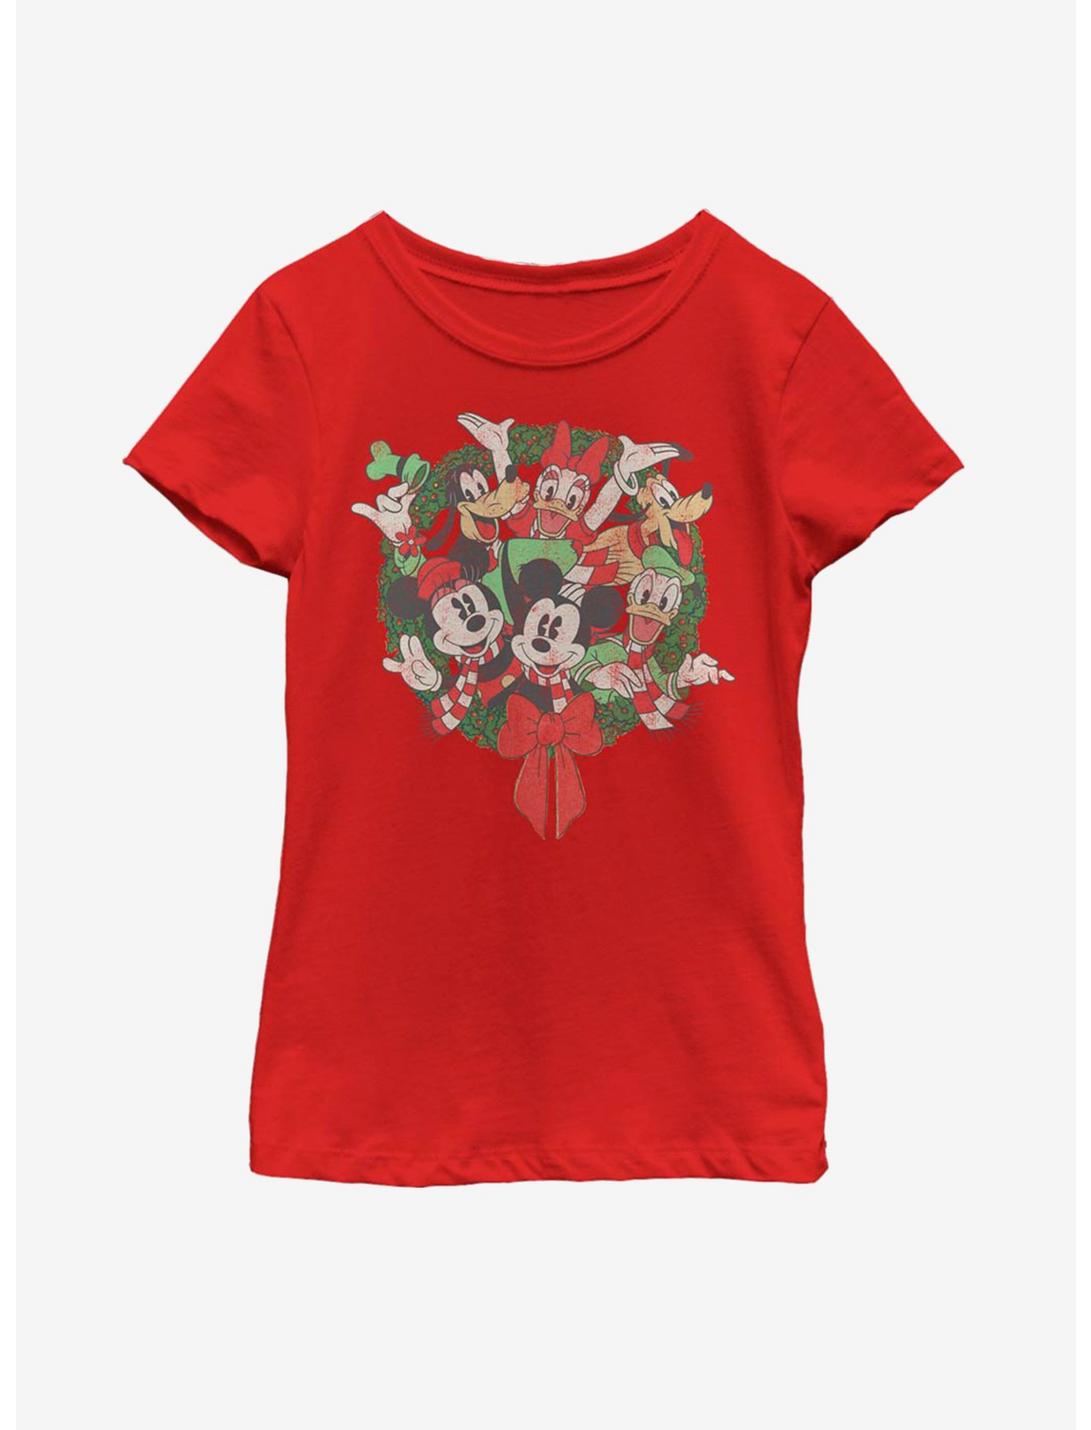 Disney Mickey Mouse Friends Wreath Youth Girls T-Shirt, RED, hi-res